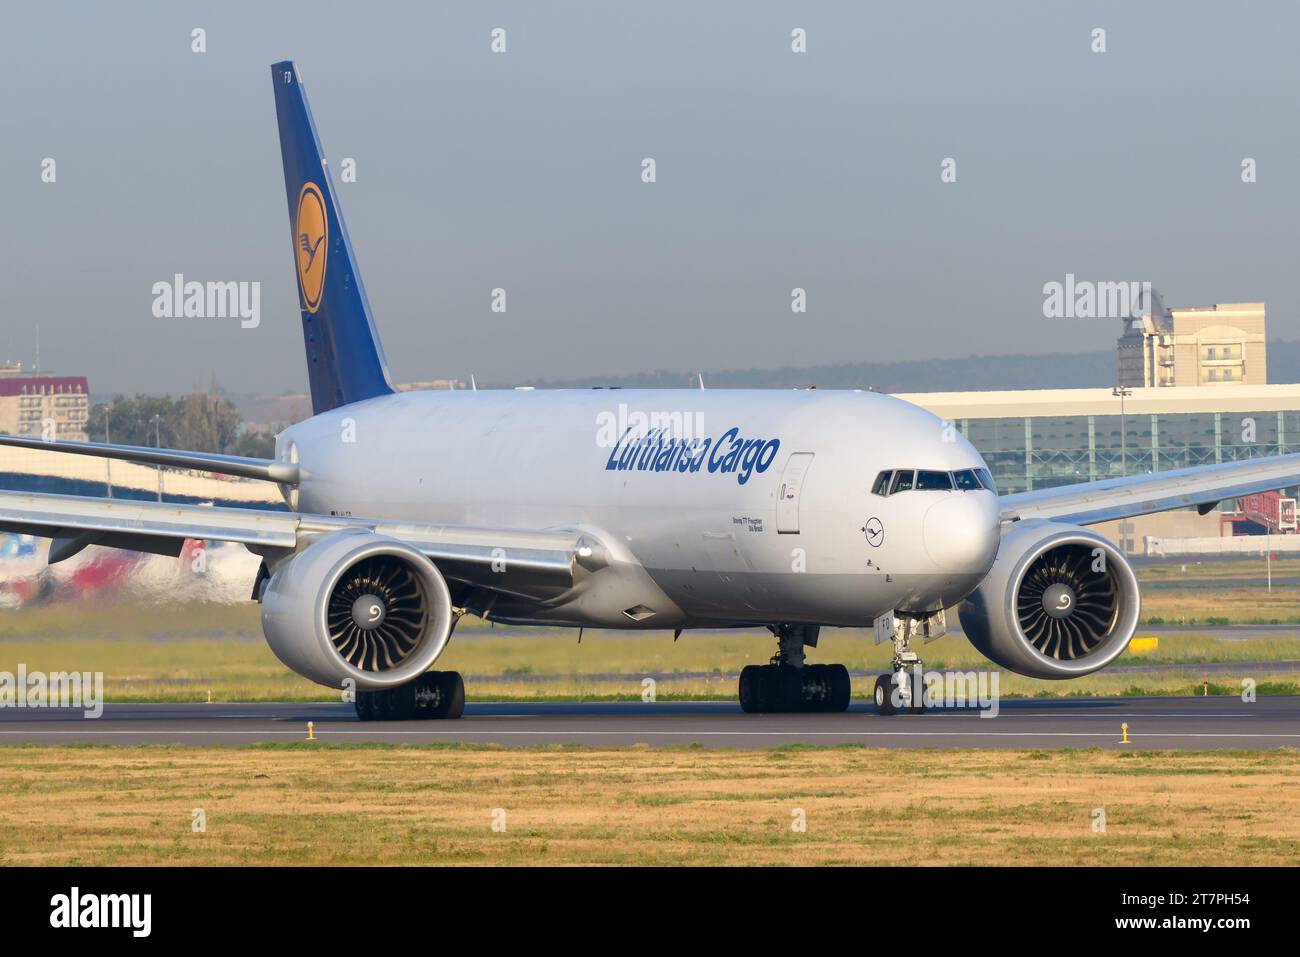 Lufthansa Cargo Boeing 777F aircraft with engines GE 90. Airplane of model 777 for freigther transport of Lufthansa Cargo. Engines GE90-110B1L. Stock Photo